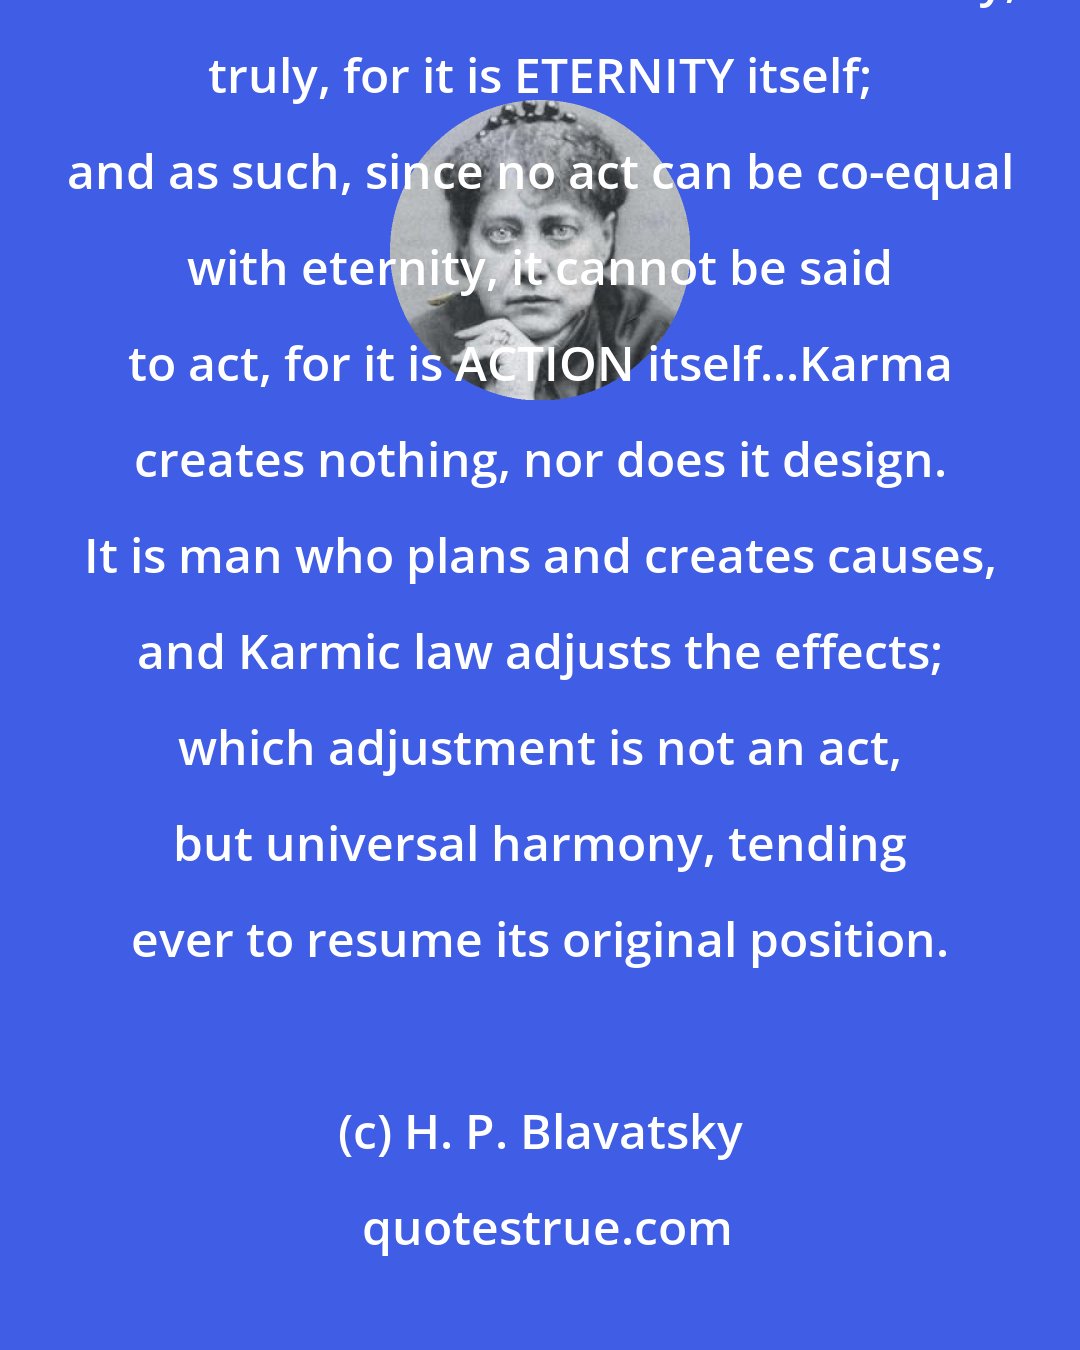 H. P. Blavatsky: This Law -- whether Conscious or Unconscious --predestines nothing and no one. It exists from and in Eternity, truly, for it is ETERNITY itself; and as such, since no act can be co-equal with eternity, it cannot be said to act, for it is ACTION itself...Karma creates nothing, nor does it design. It is man who plans and creates causes, and Karmic law adjusts the effects; which adjustment is not an act, but universal harmony, tending ever to resume its original position.